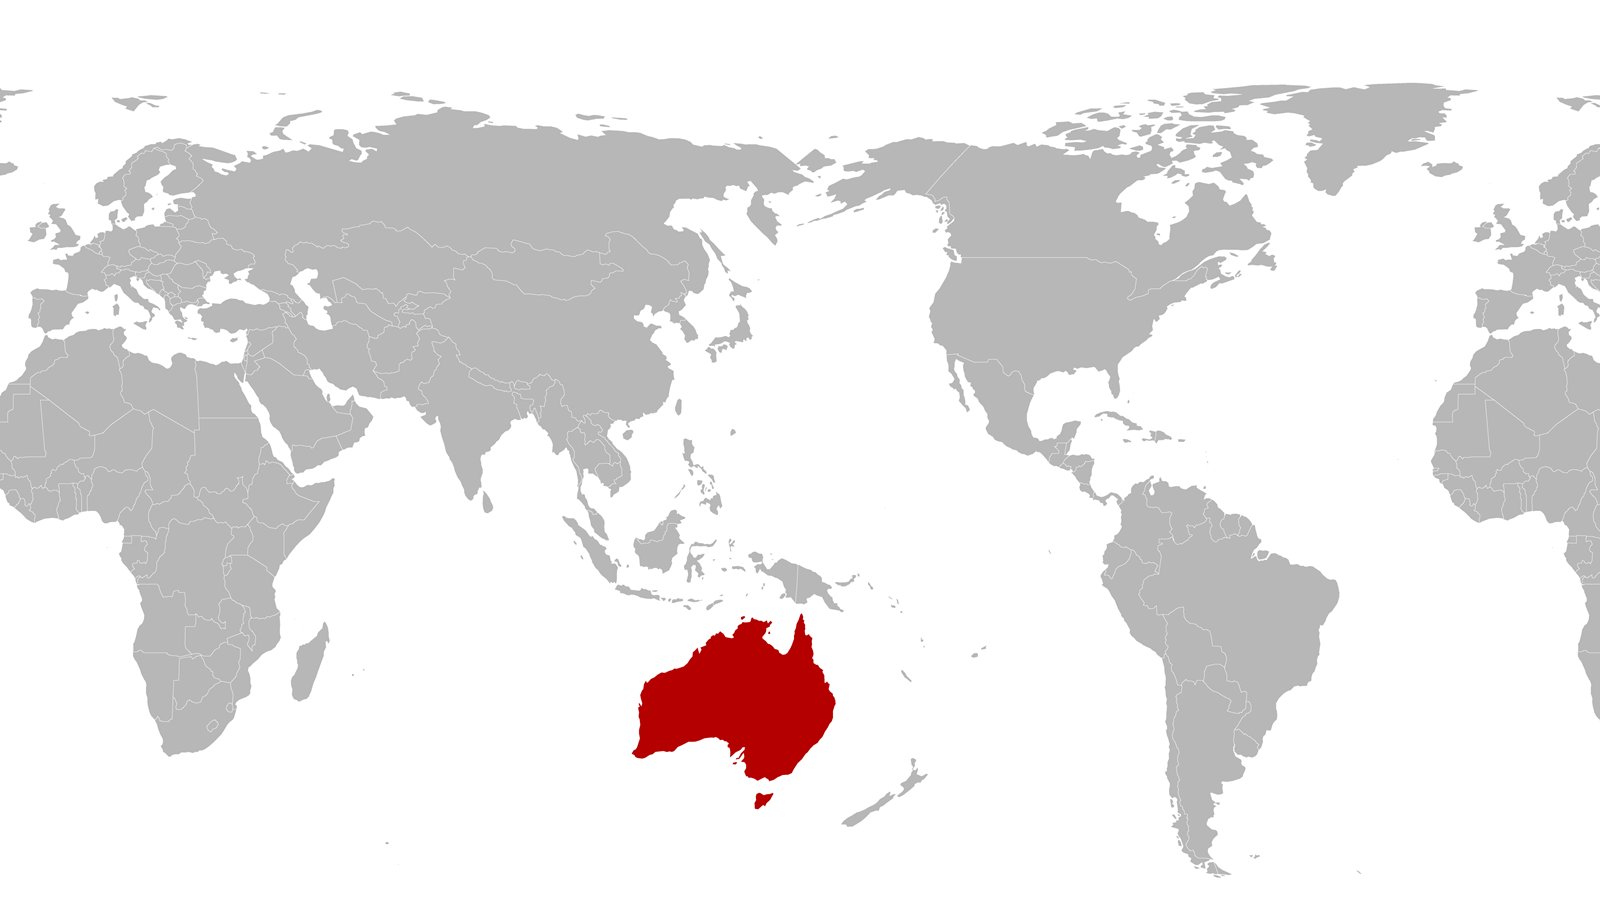 World map with centred Australia highlighted